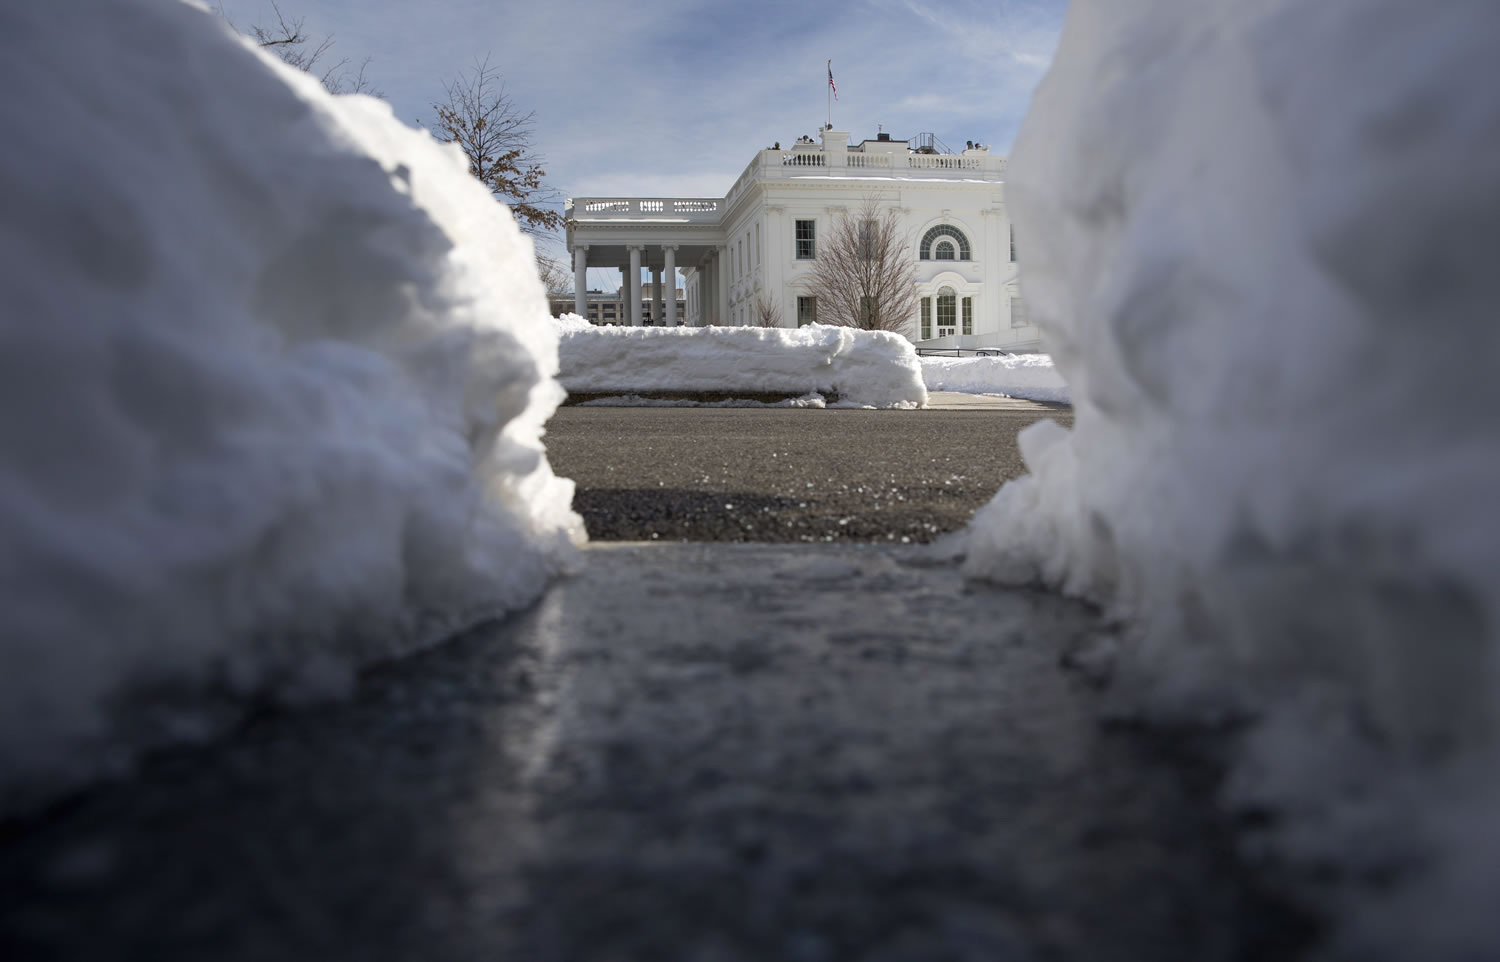 Paths and a driveway are cleared of snow on the White House grounds in Washington on Monday.